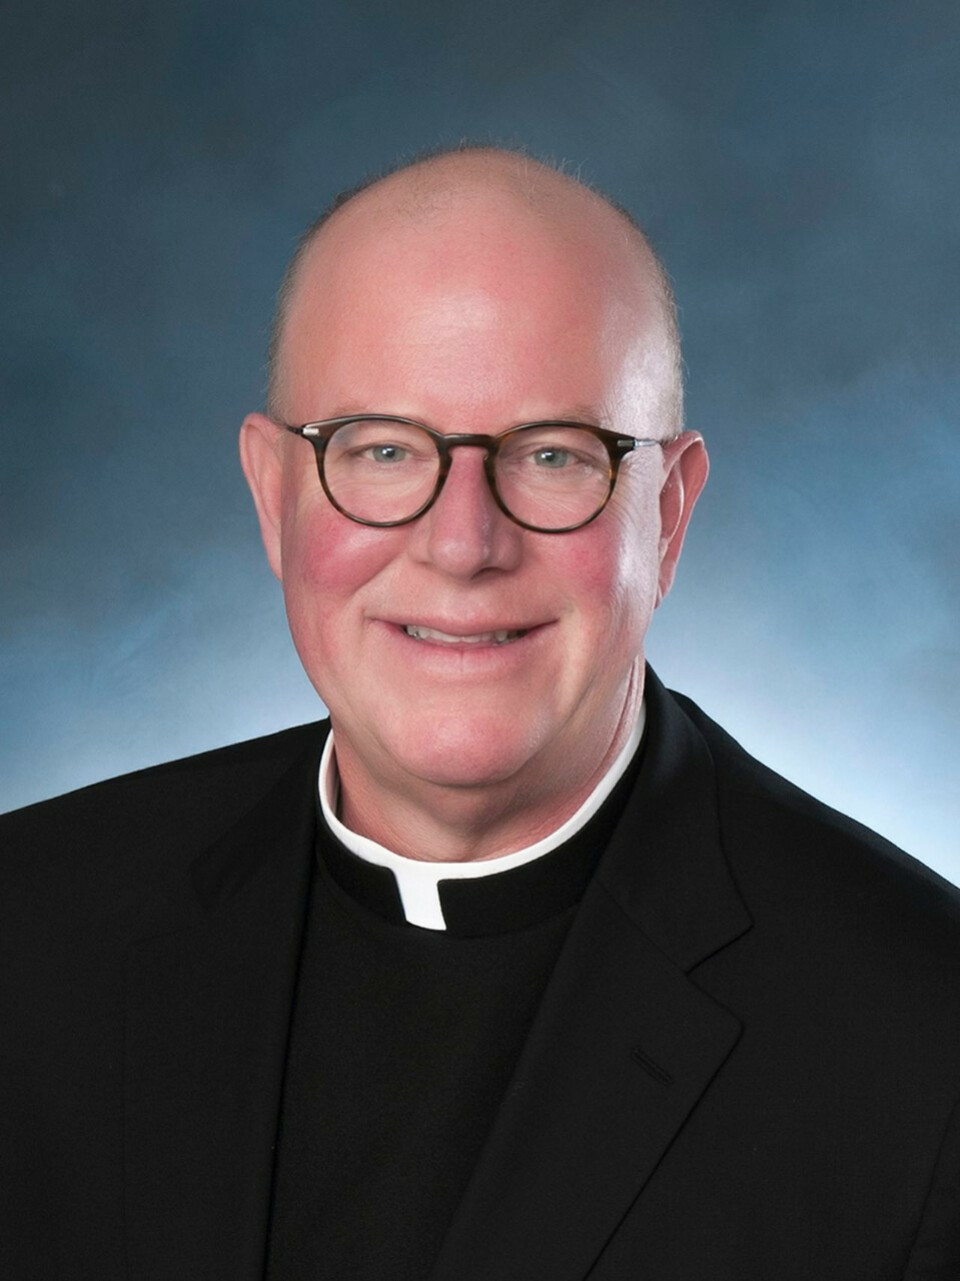 7 p.m. -  A Conversation with Bishop William D. Byrne~ A Live Streaming Event with Ray Hershel